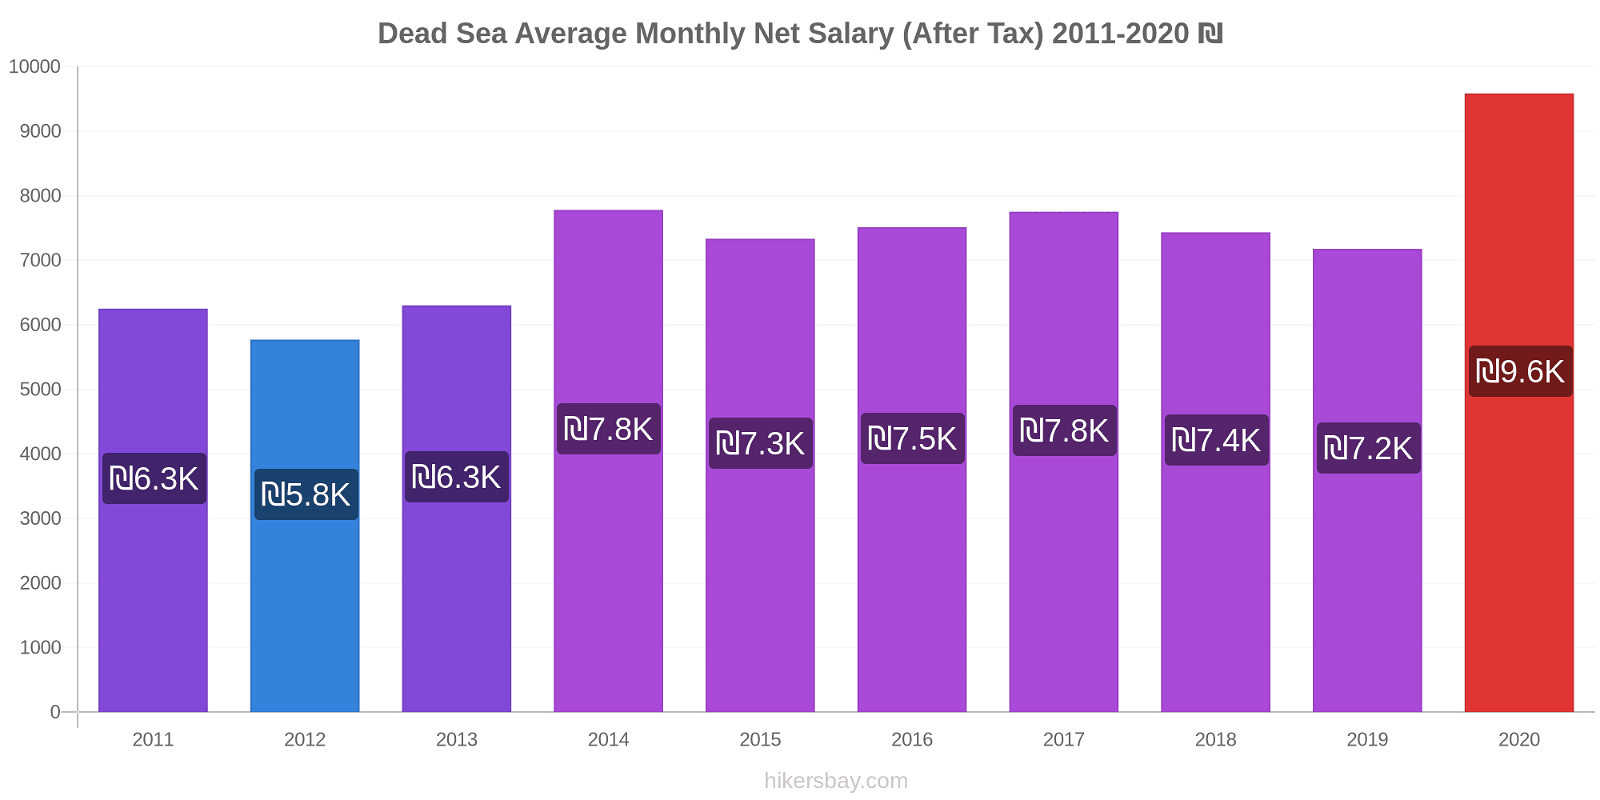 Dead Sea price changes Average Monthly Net Salary (After Tax) hikersbay.com